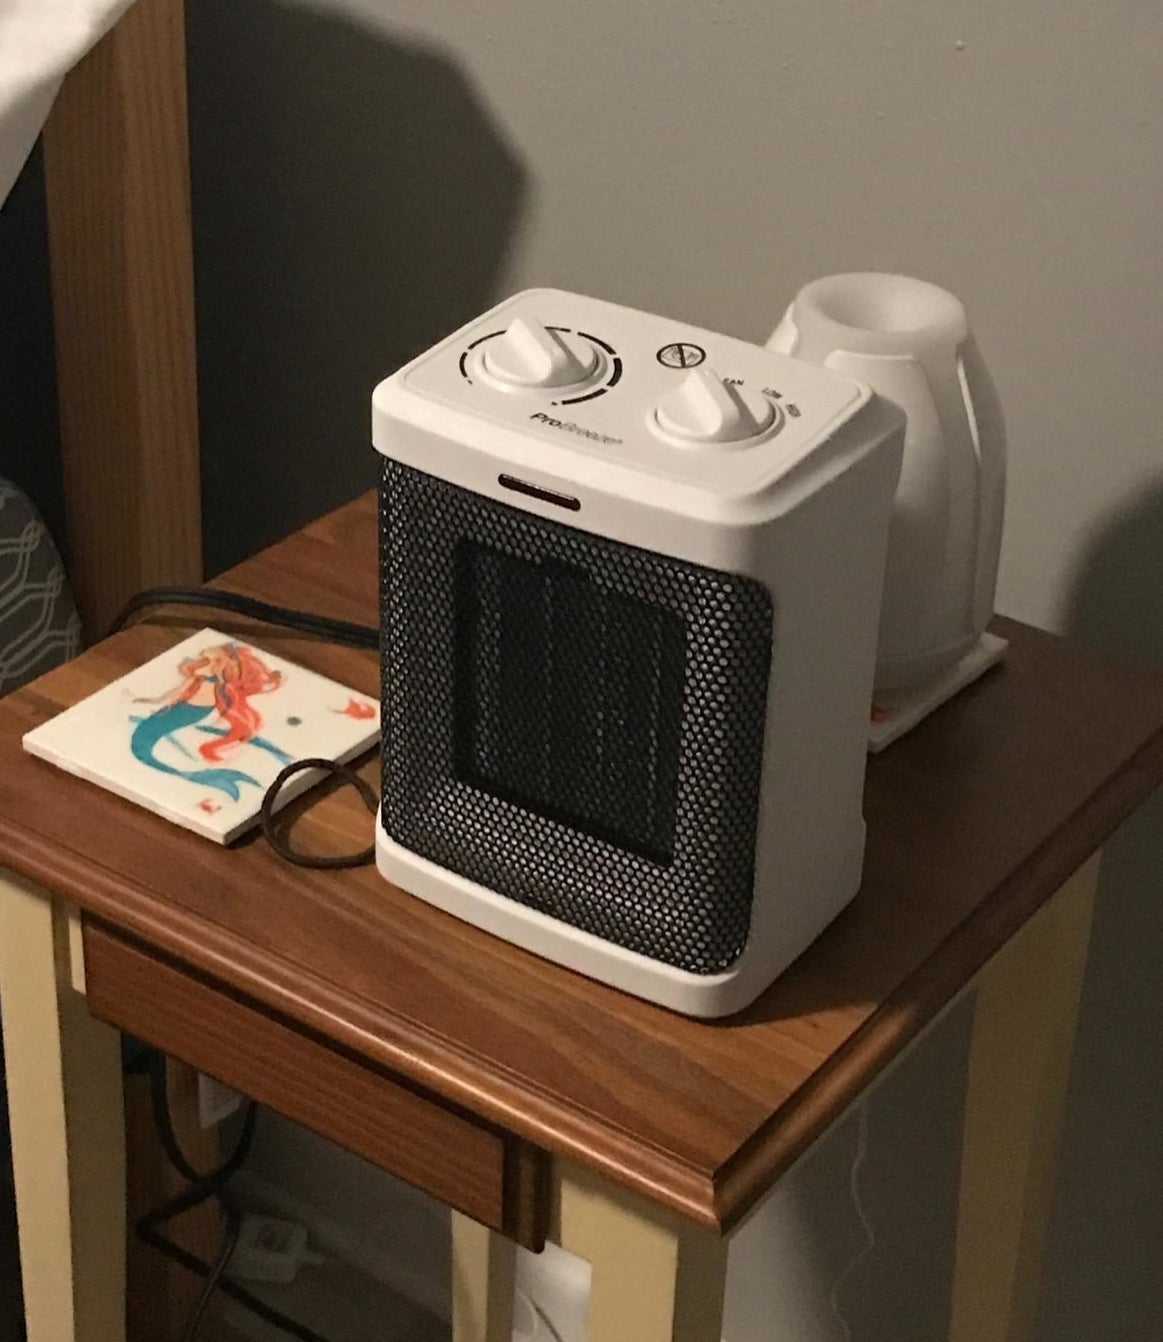 The space heater in white